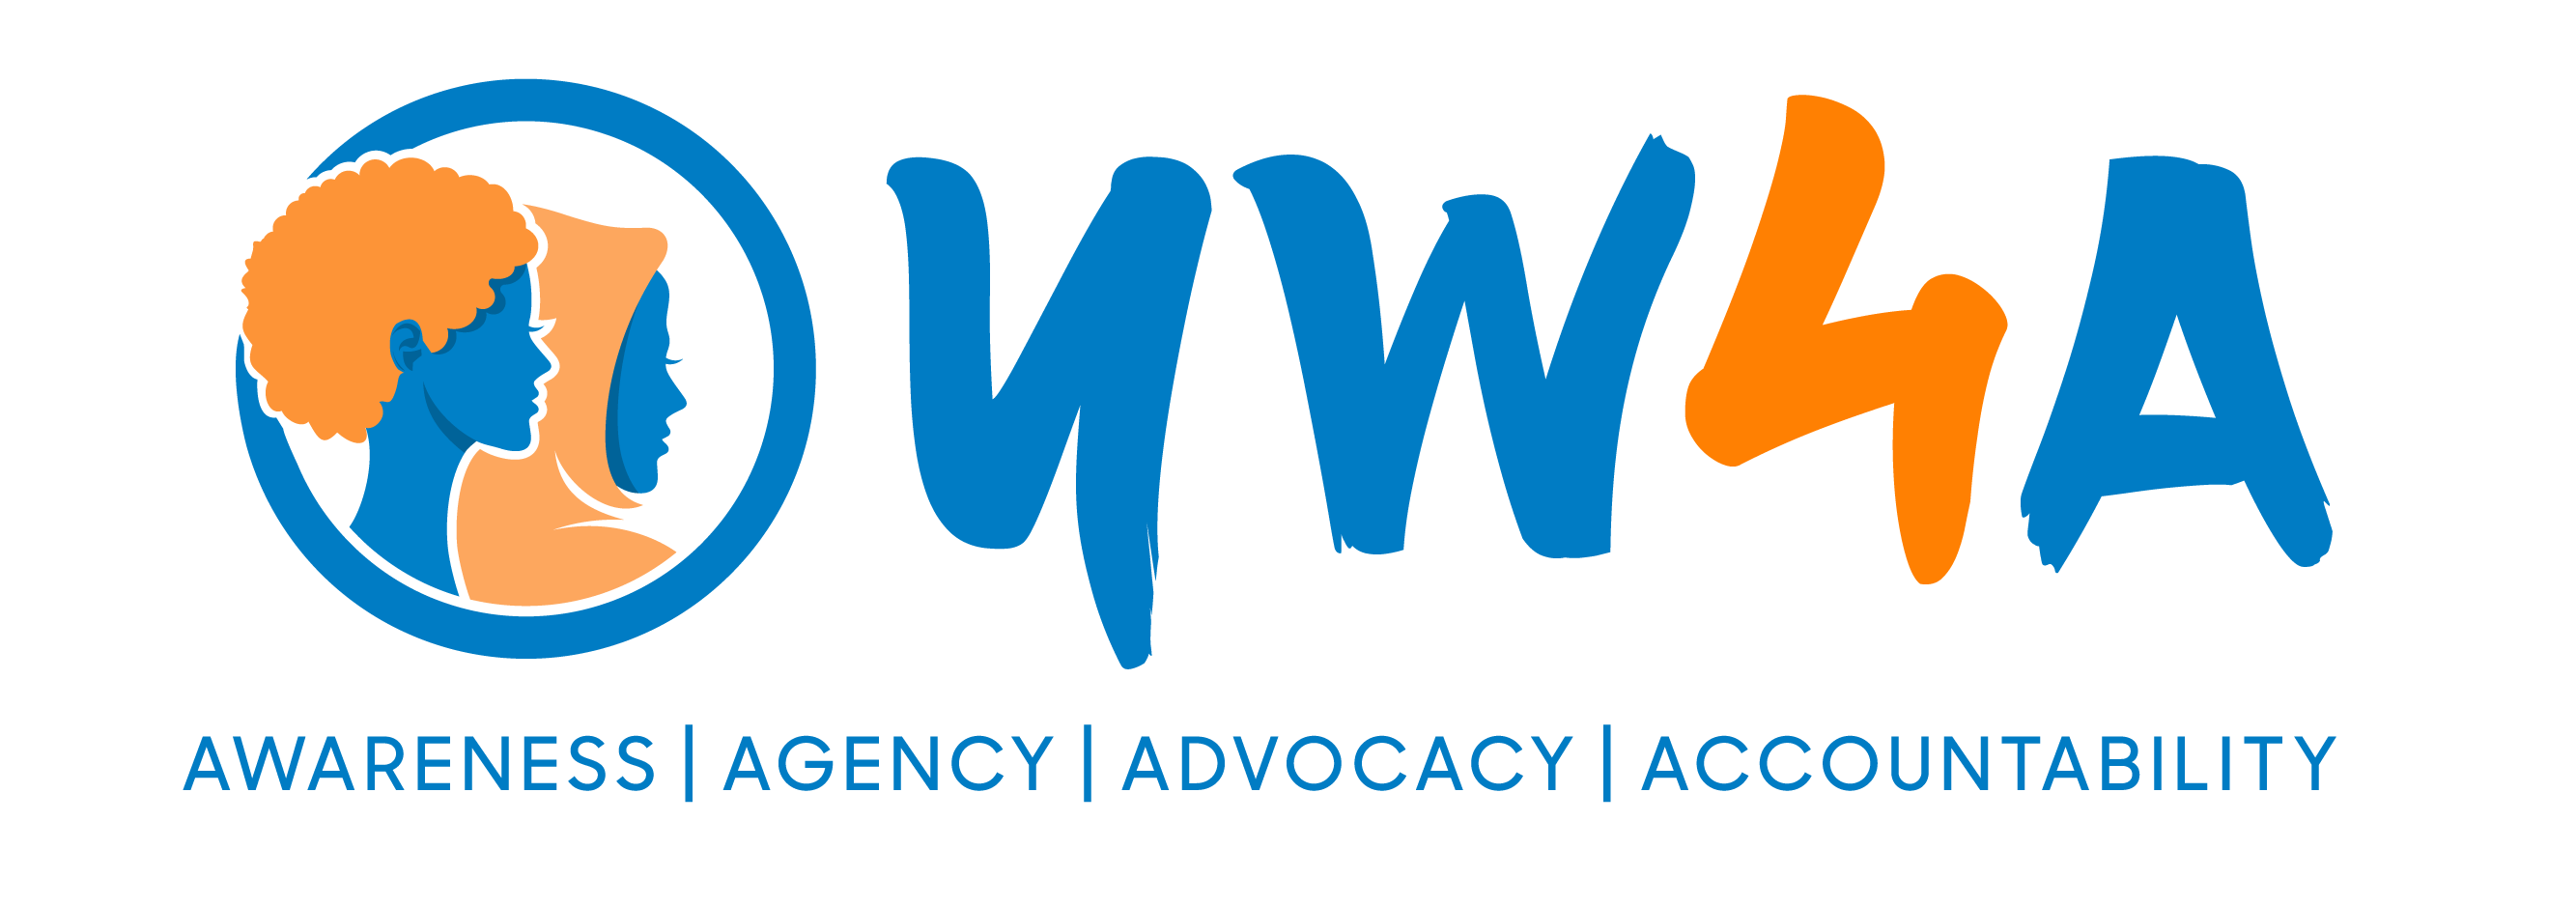 Young Women for Awareness, Agency, Advocacy and Accountability (YW4A)